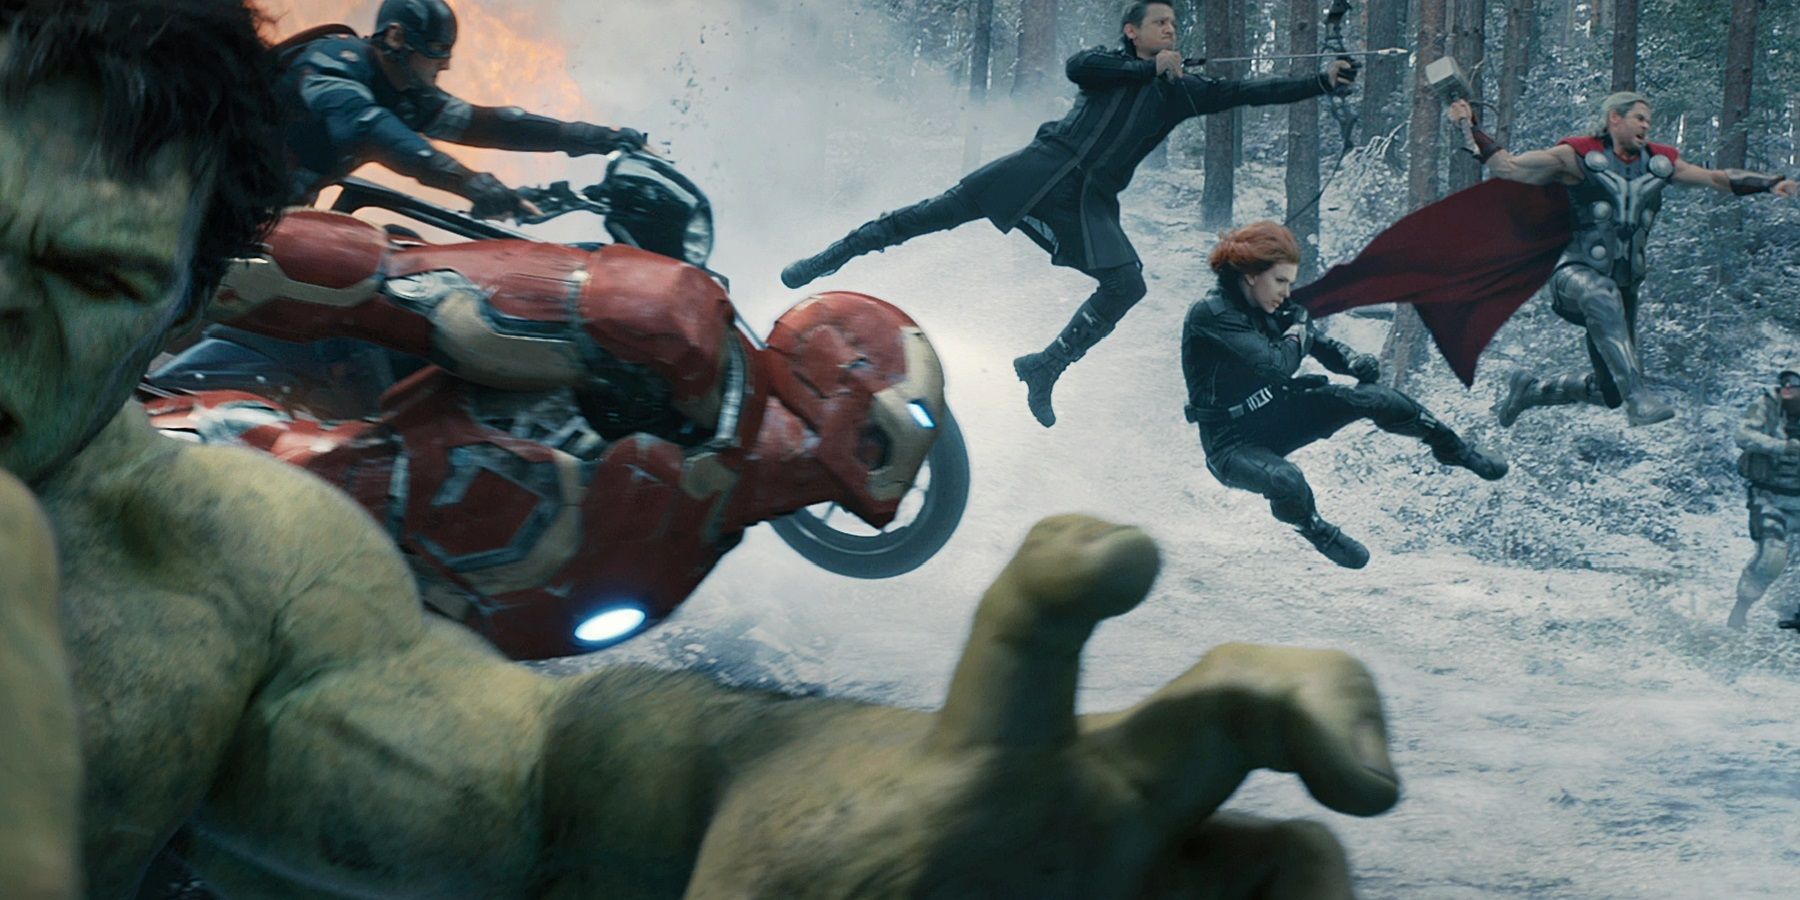 The Avengers head into battle in the opening of Avengers Age of Ultron